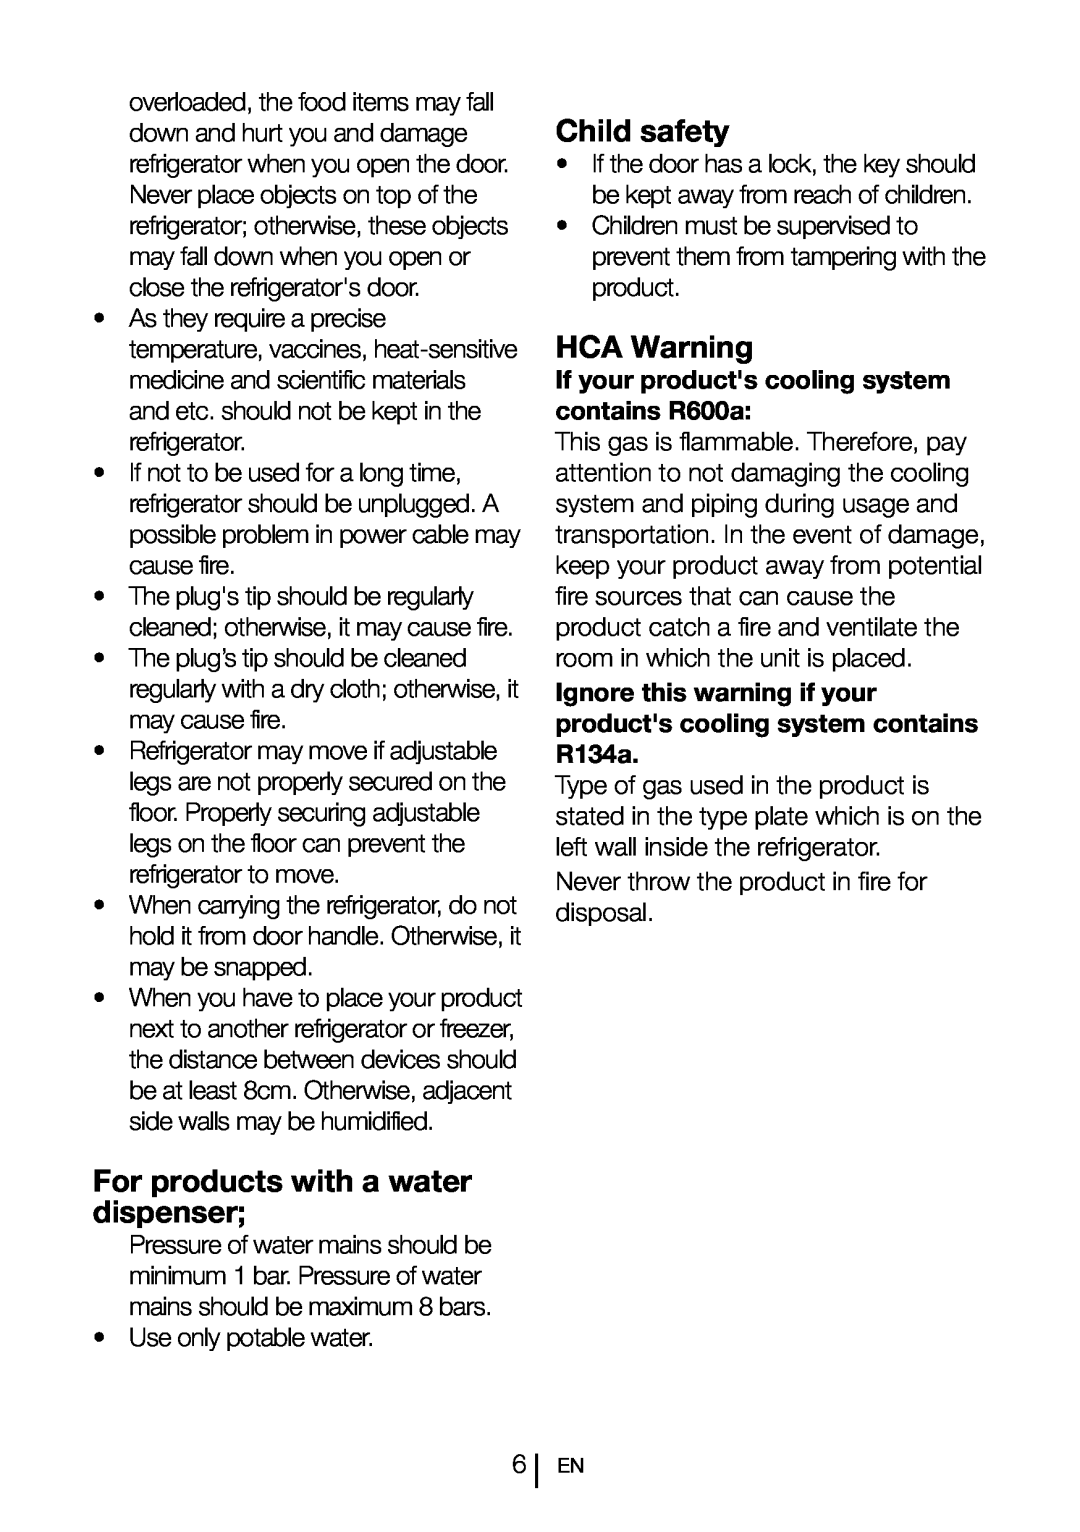 Blomberg SND 9681 XD operating instructions For products with a water dispenser, Child safety, HCA Warning 